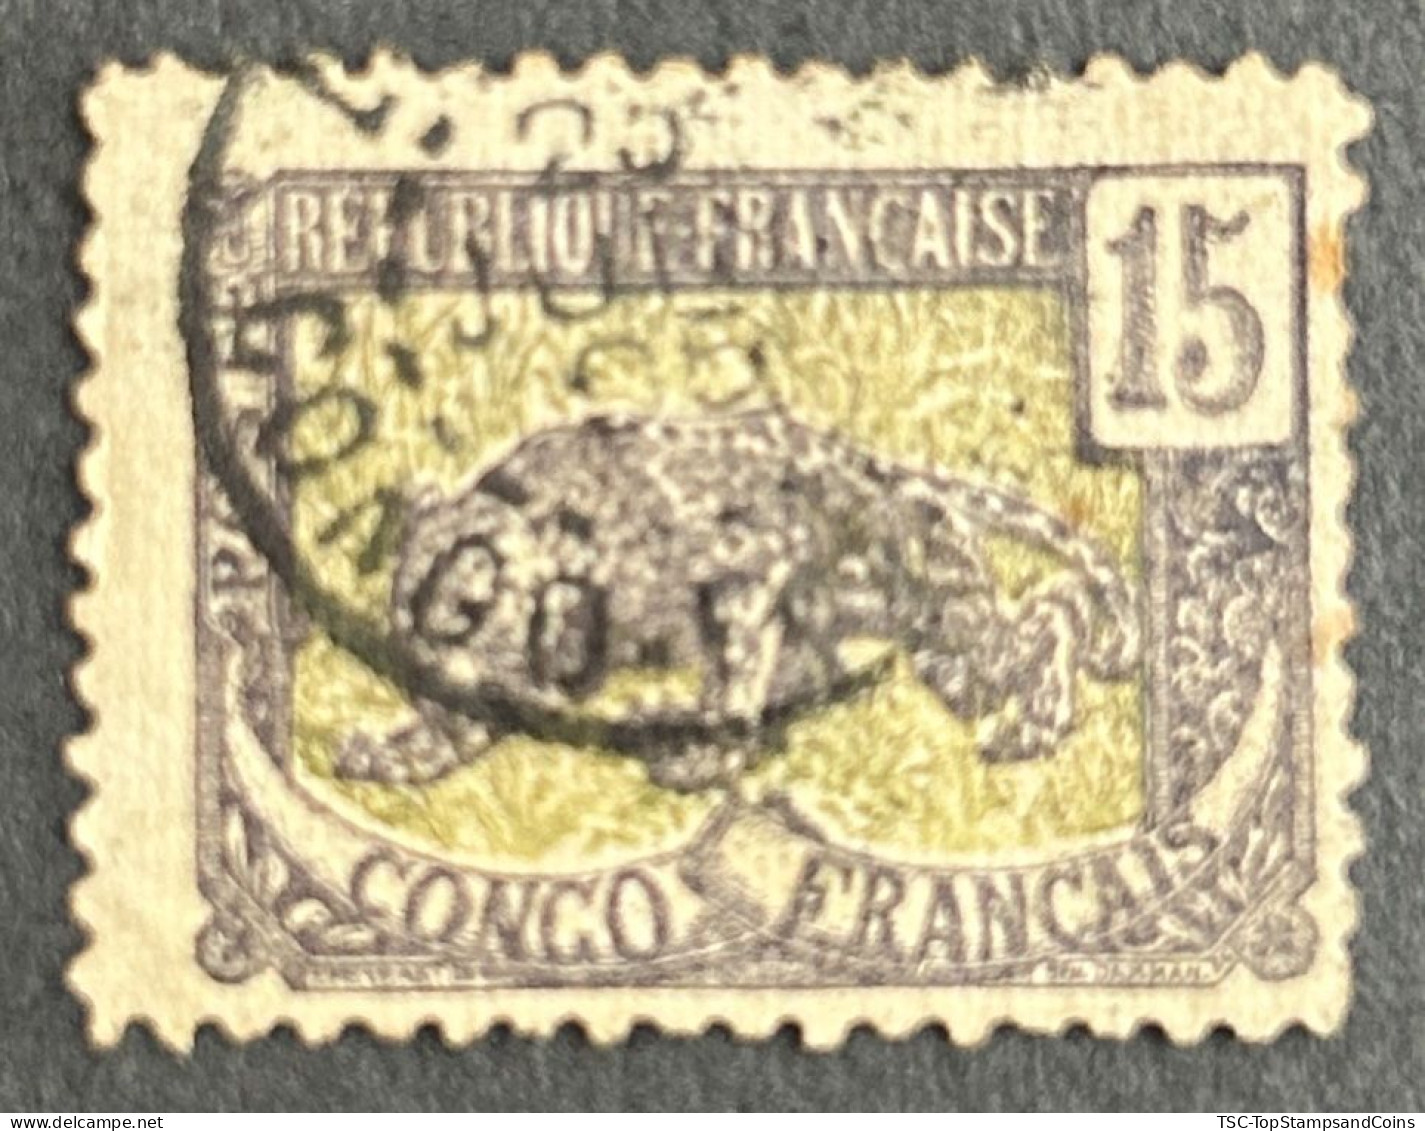 FRCG032U - Leopard - 15 C Used Stamp - French Congo - 1907 - Used Stamps